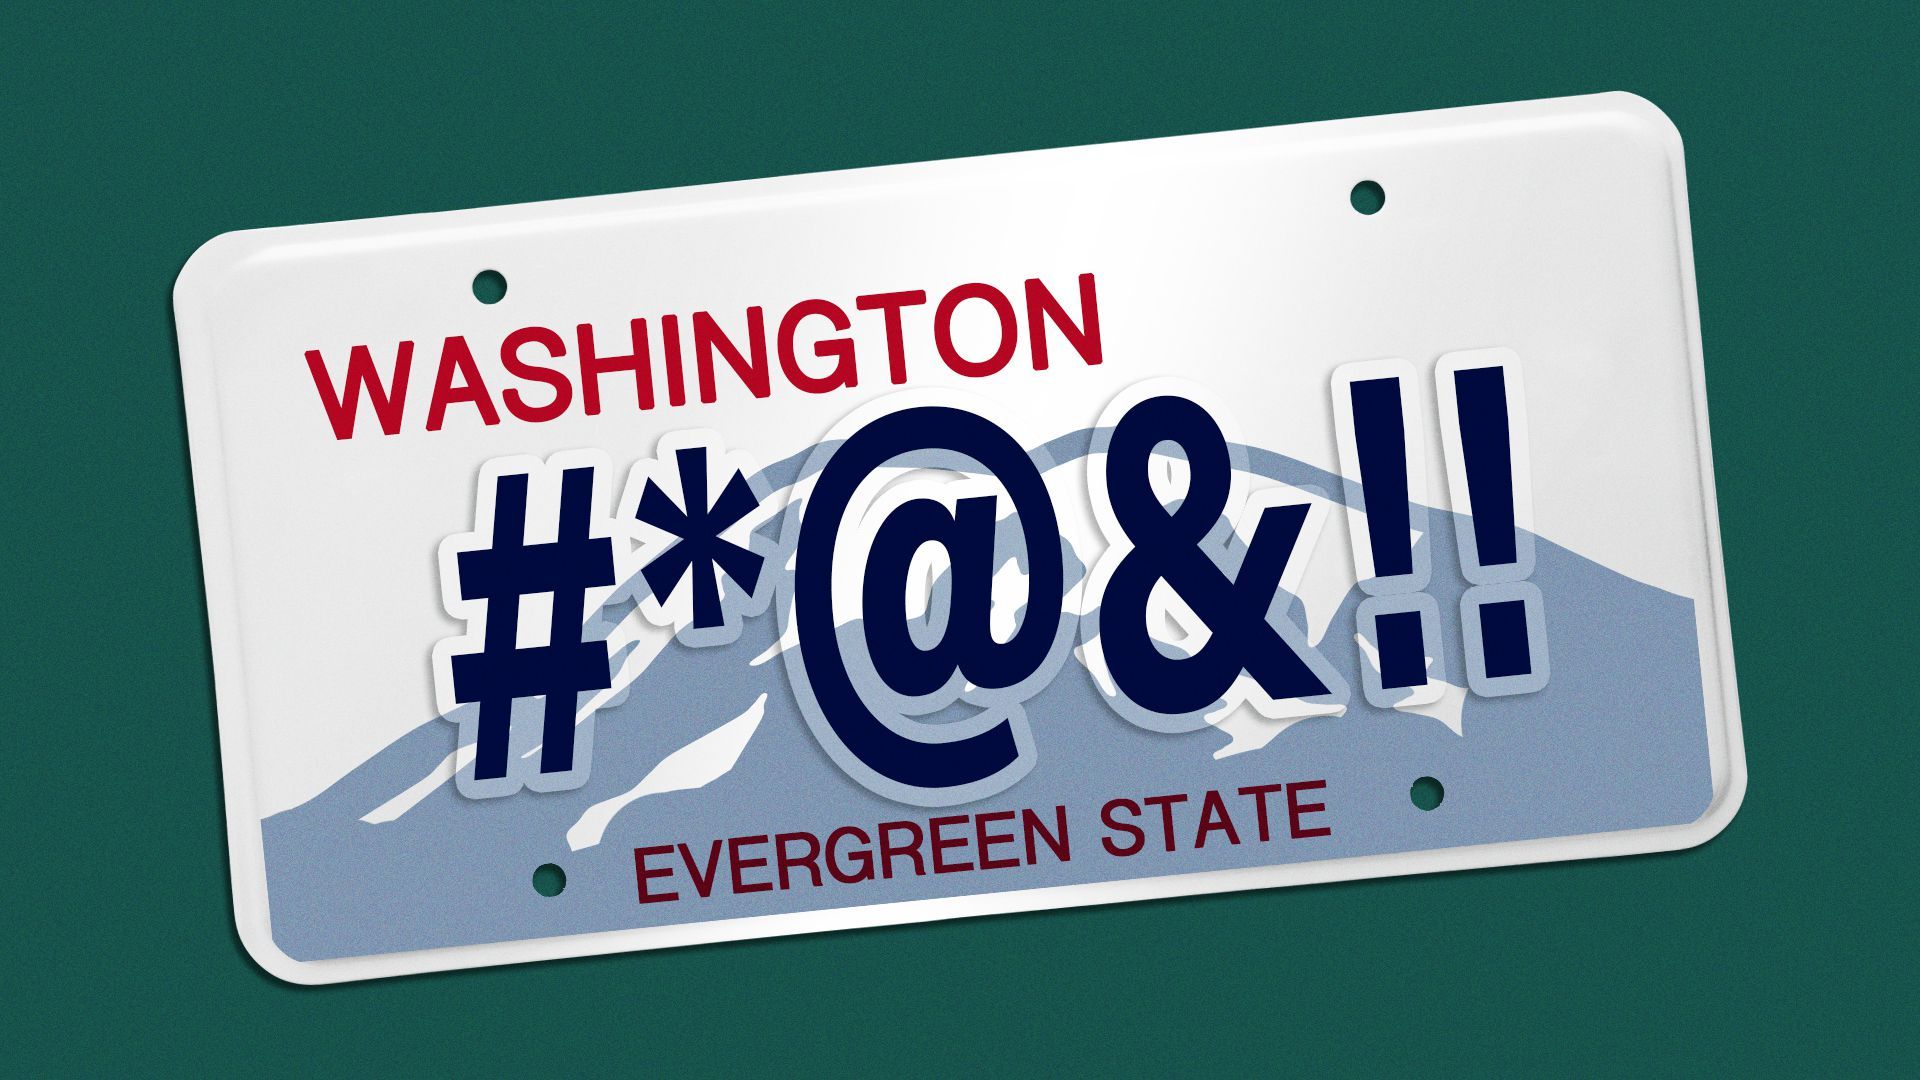 Illustration of a Washington vanity license plate with symbols implying a swear word.